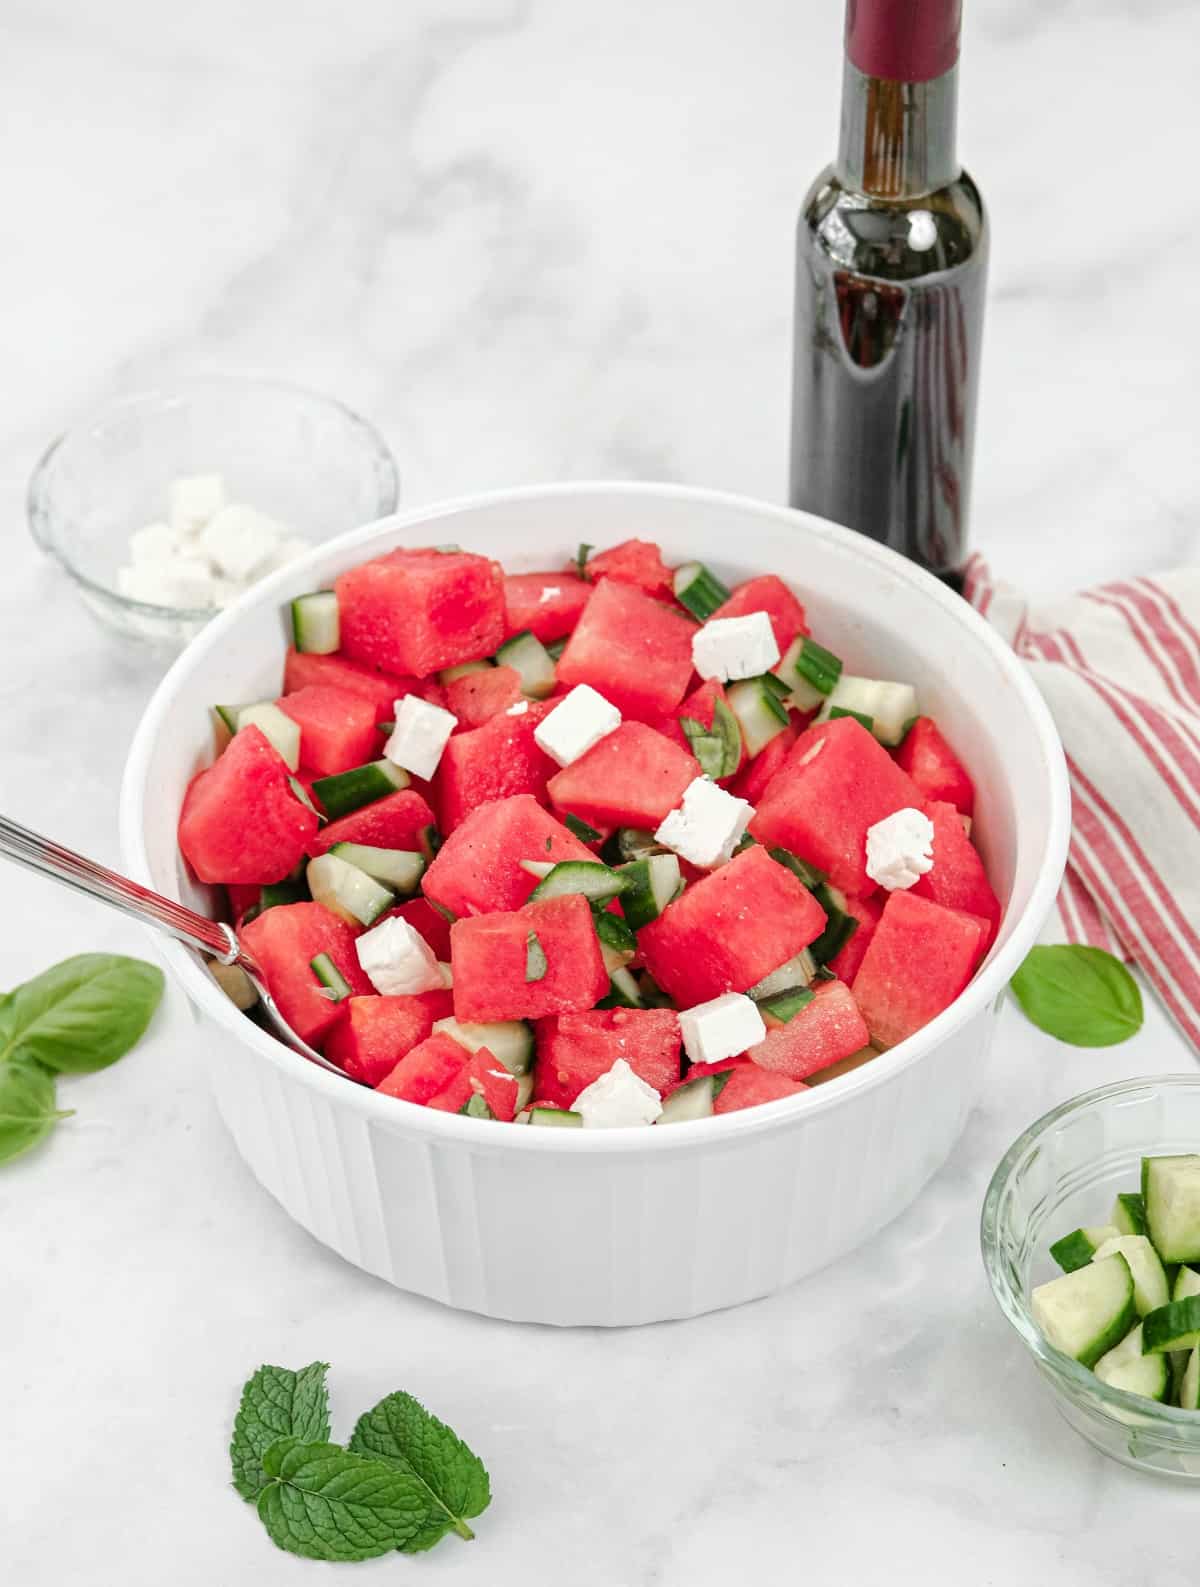 Watermelon salad in a white bowl with feta, cucumber, lime juice and herbs.